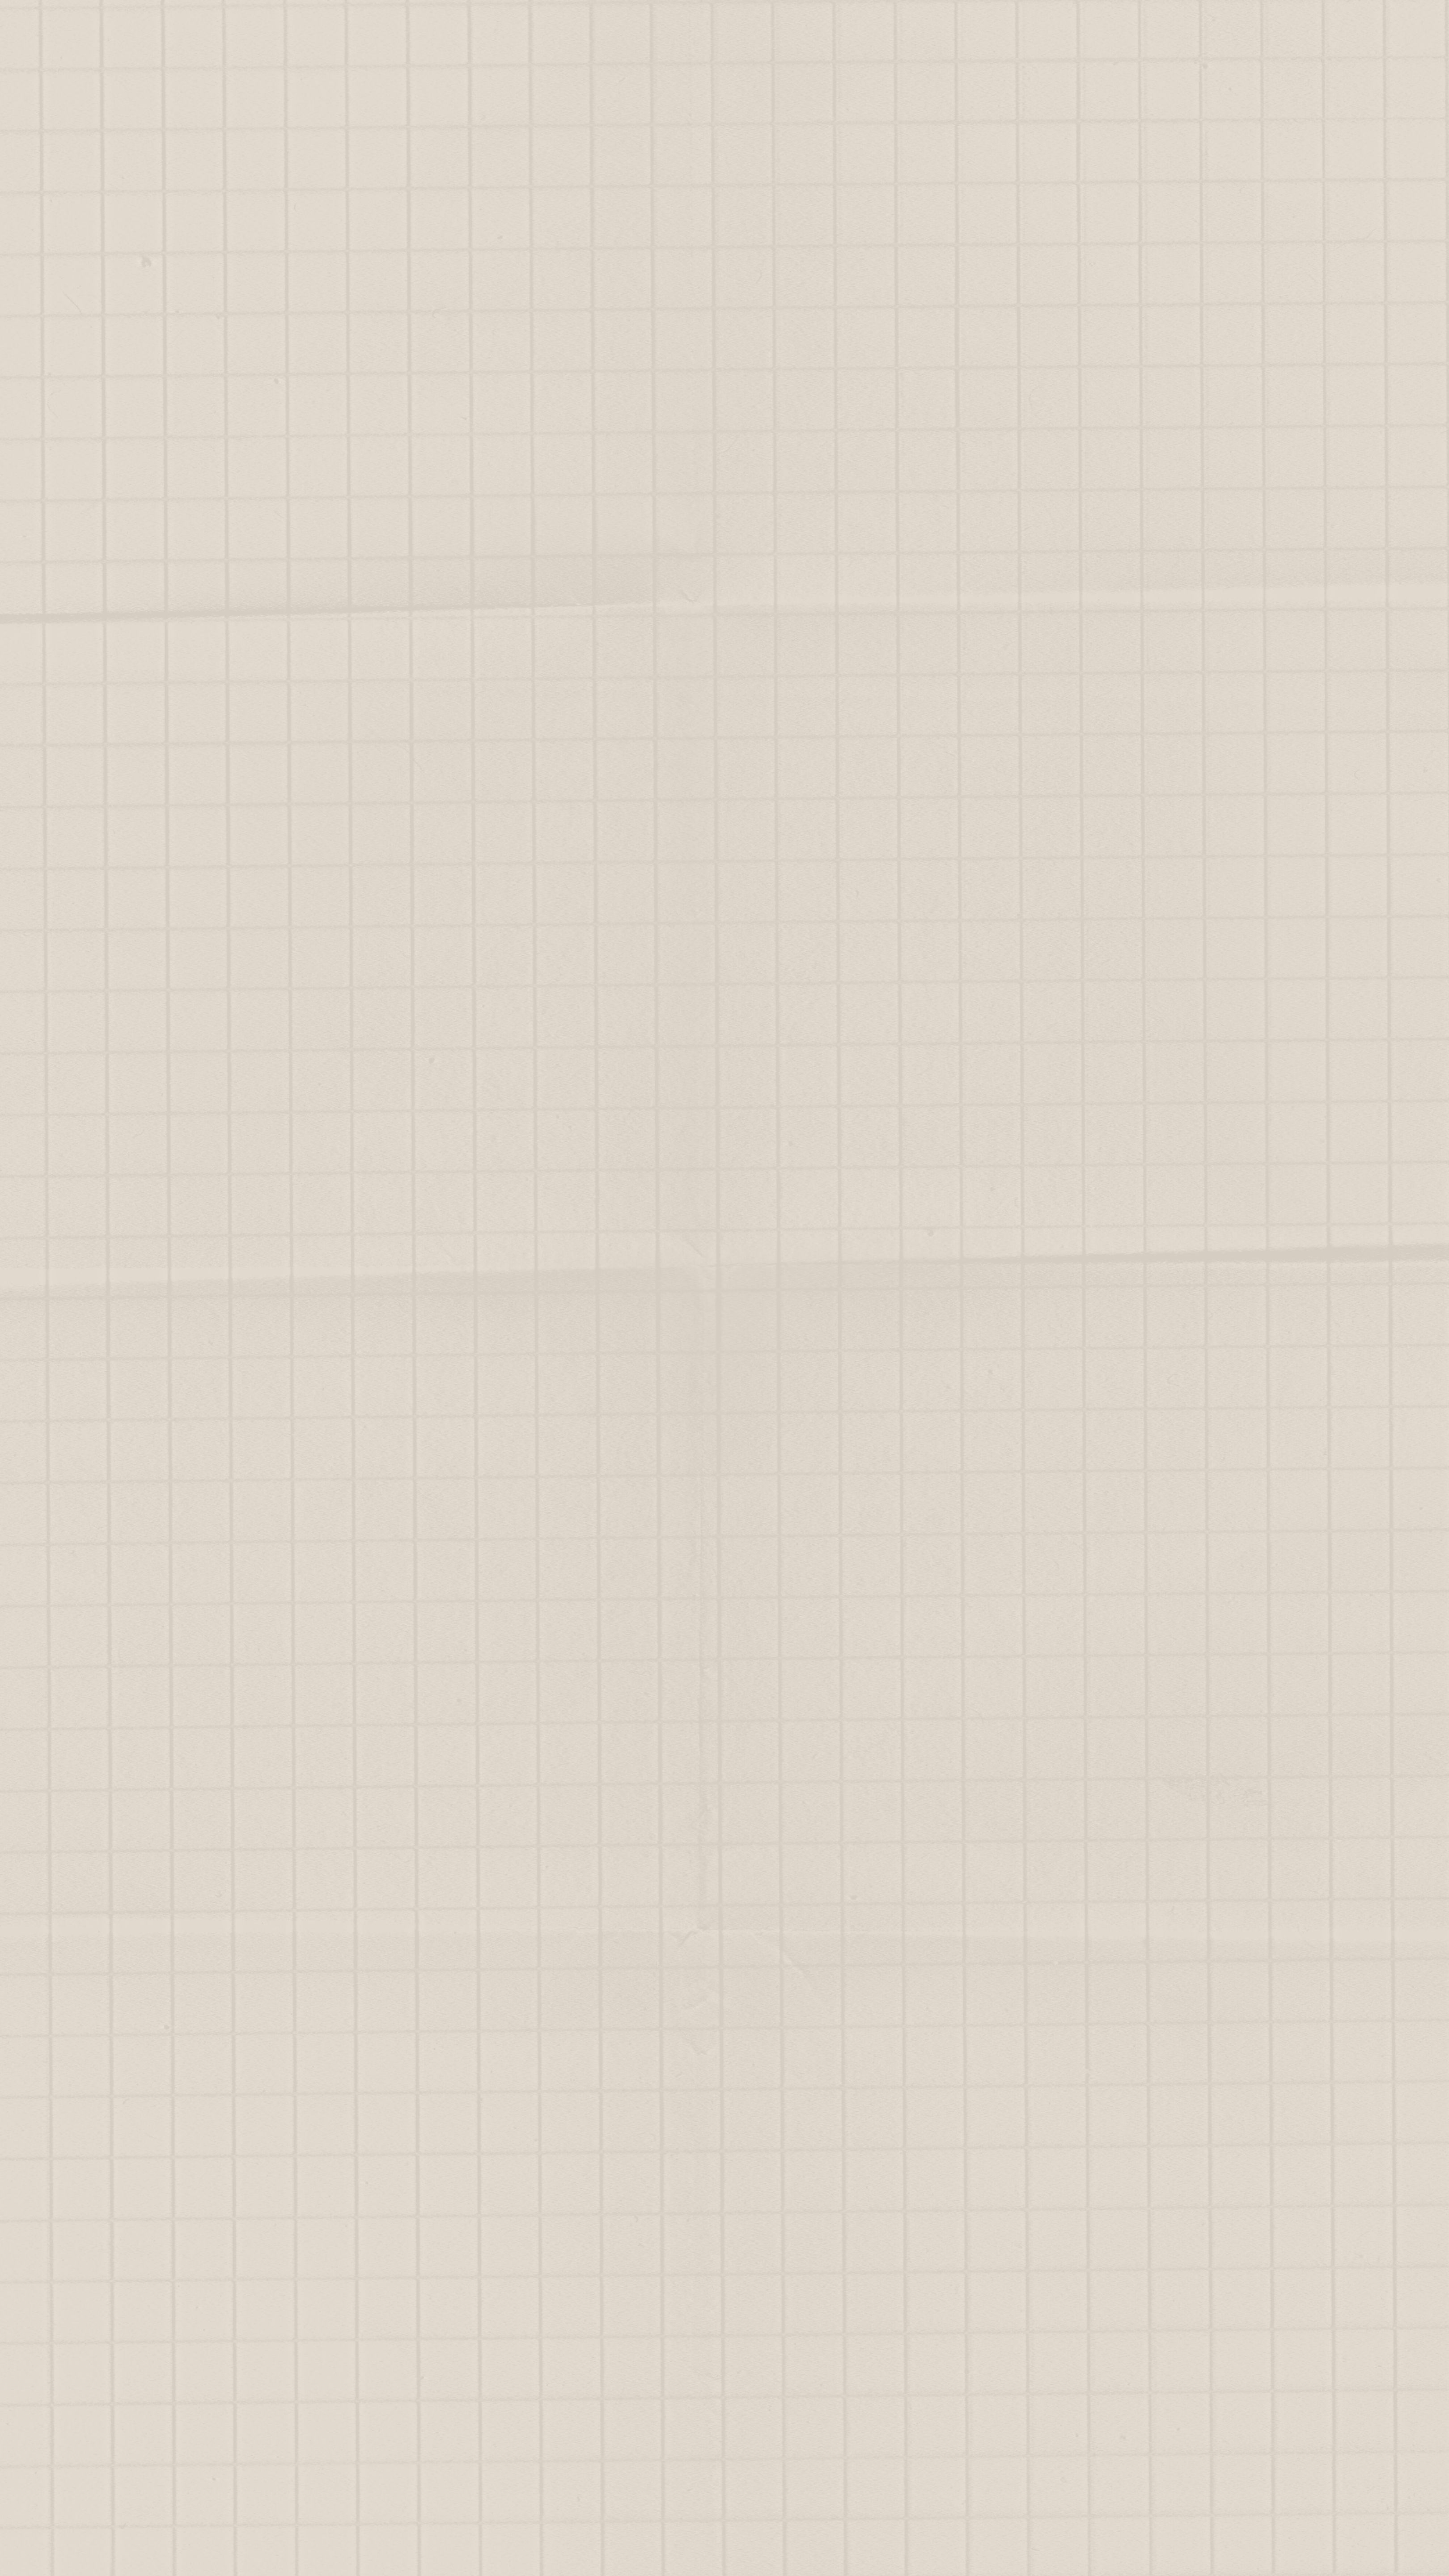 Free HD paper, notebook, grid, texture, textures